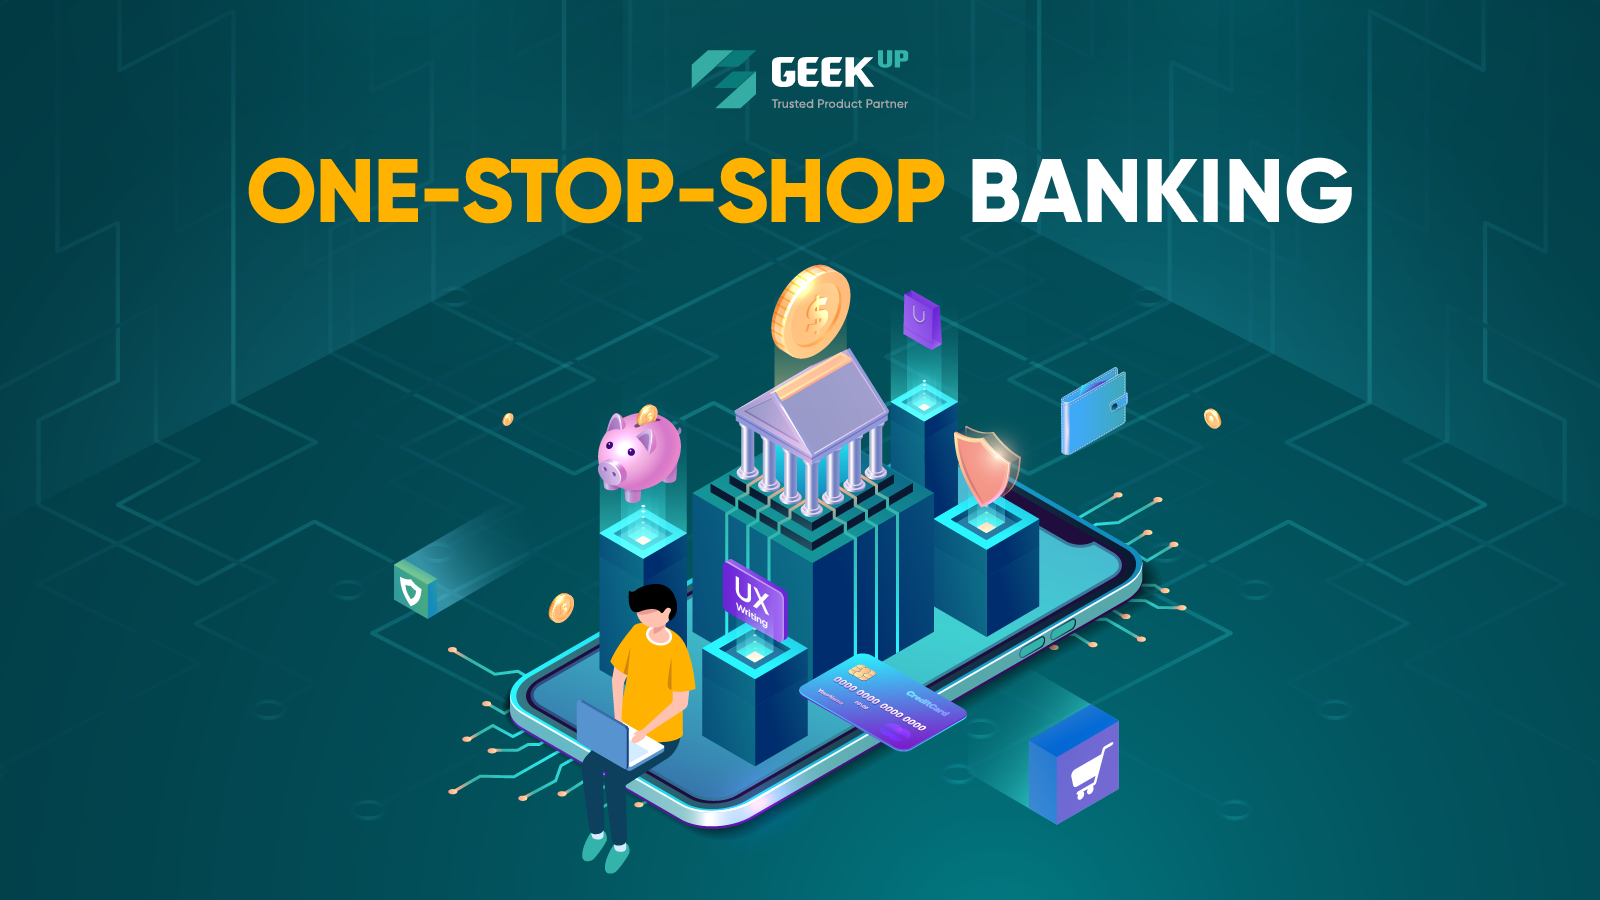 The "race" to build a "one-stop-shop" banking application